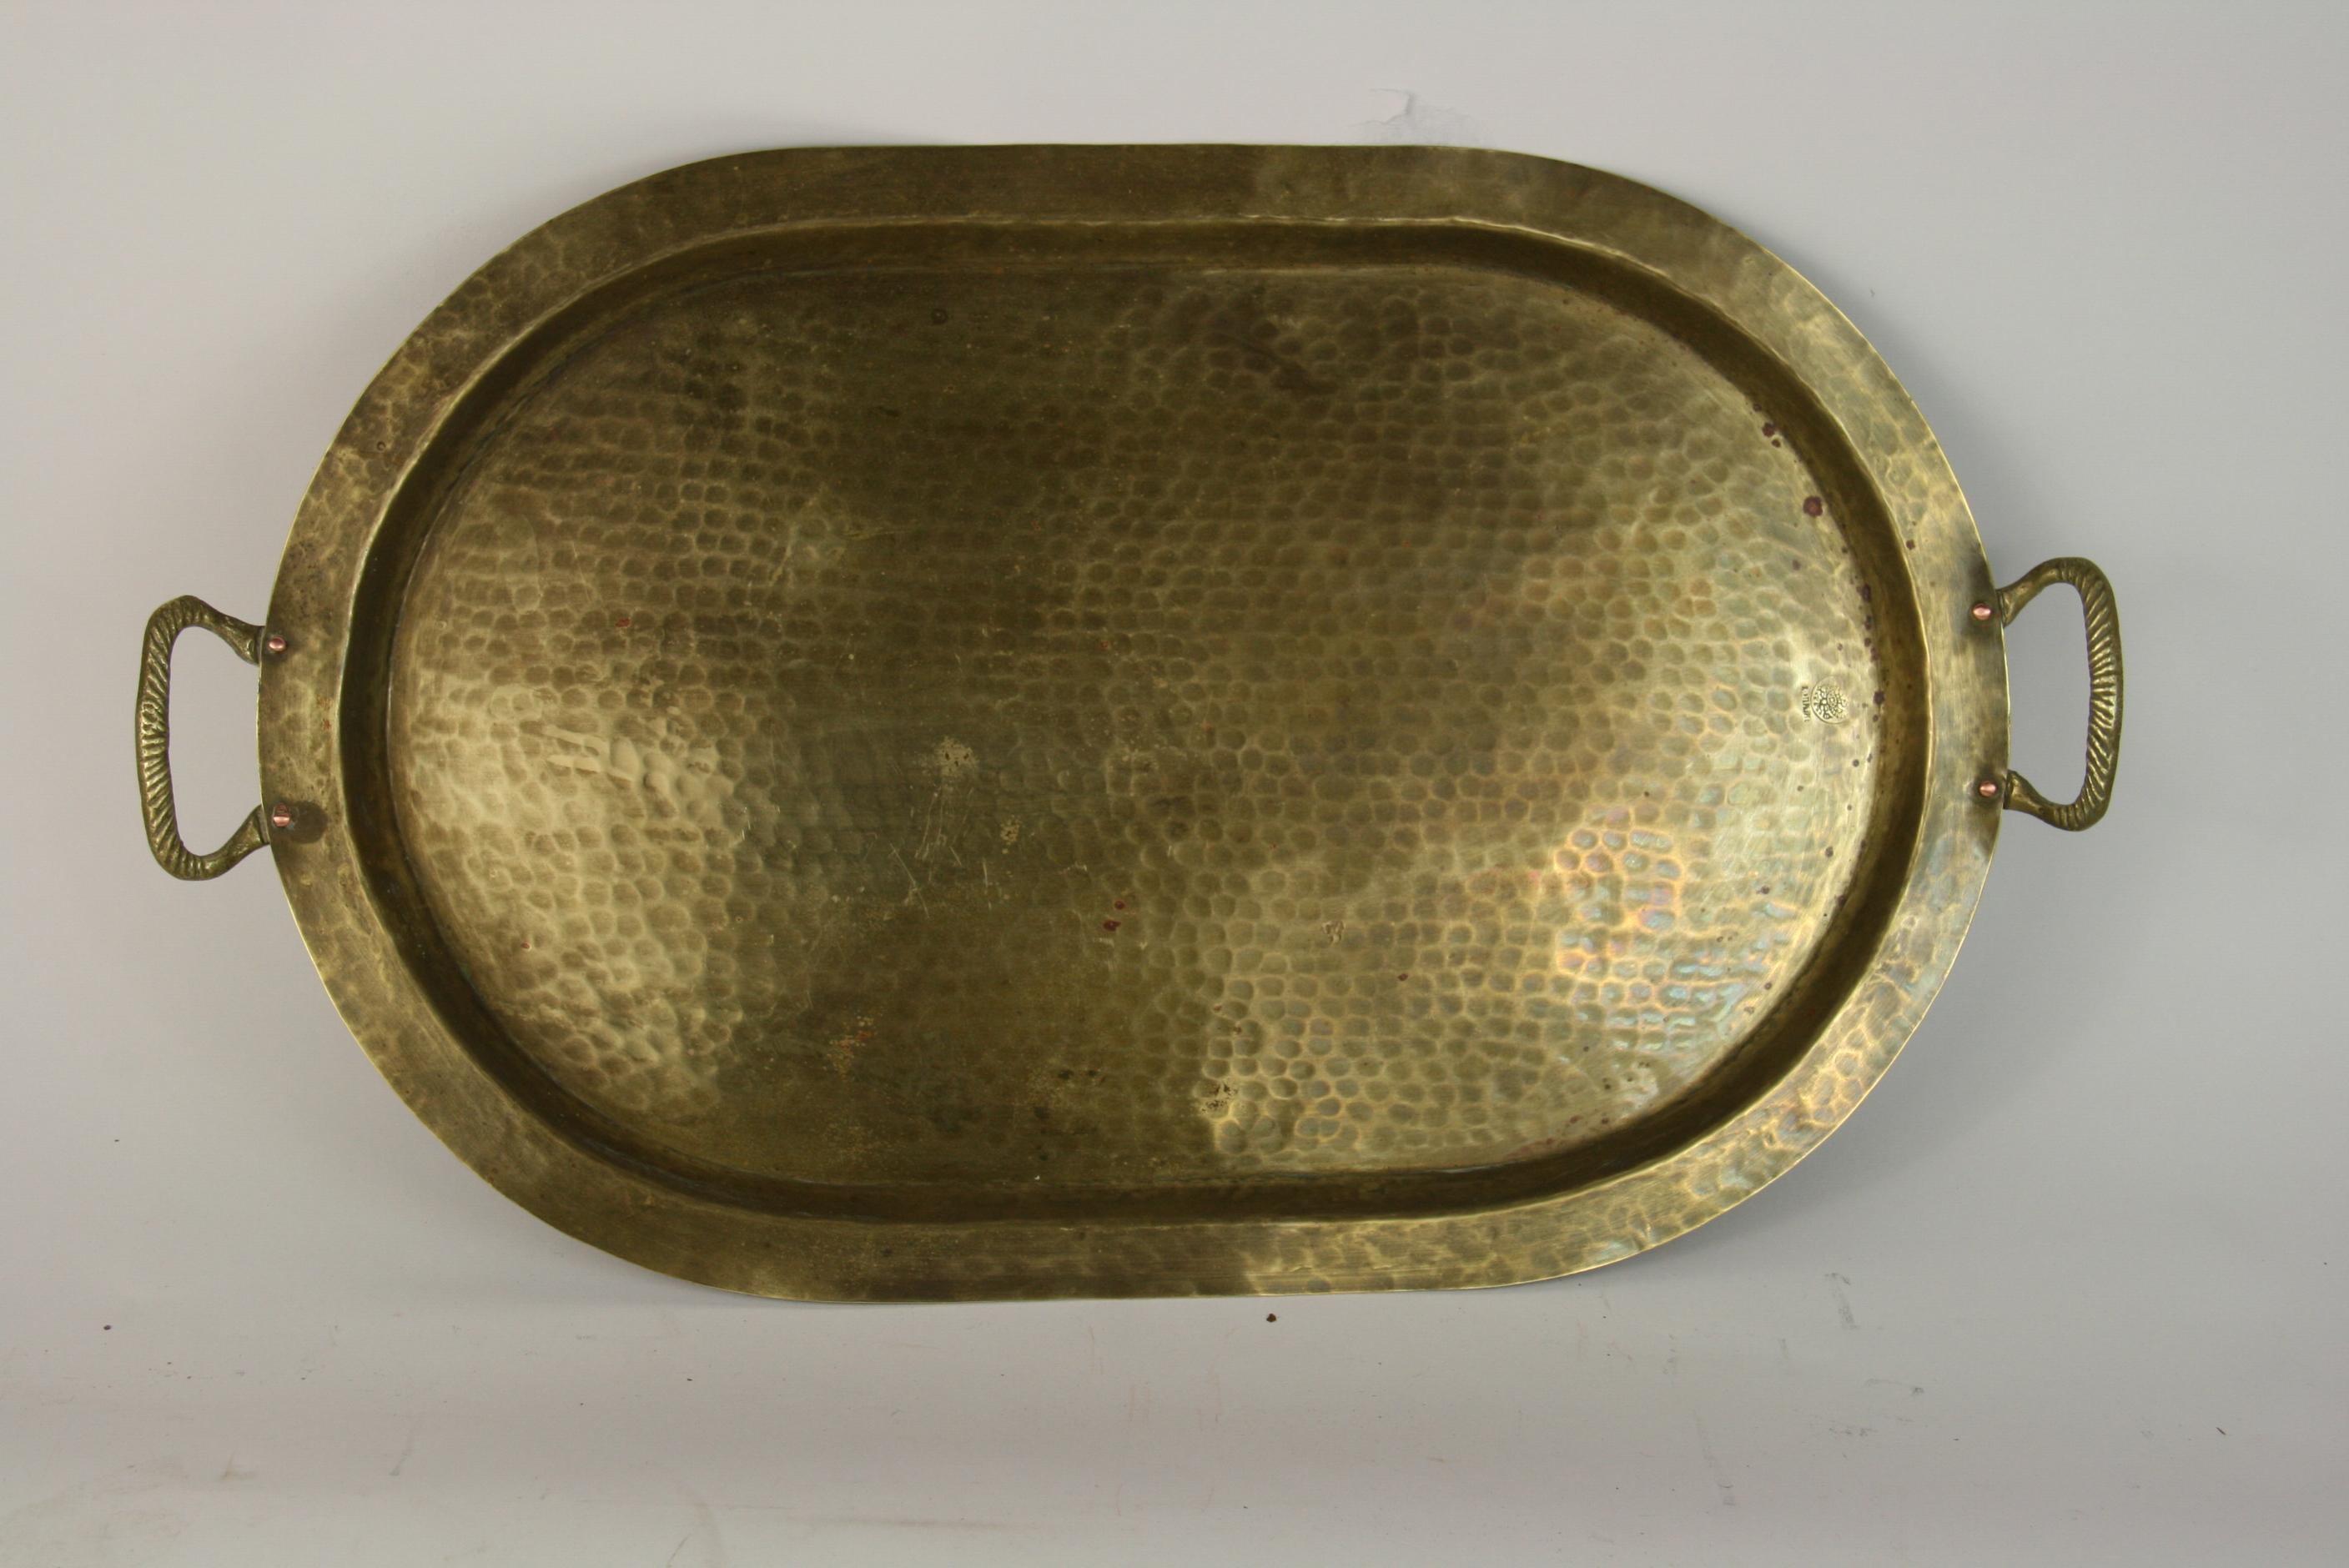 2-314 hammered brass rimmed serving tray. Spiral brass handles with copper rivets 
Winged eagle makers mark (German).